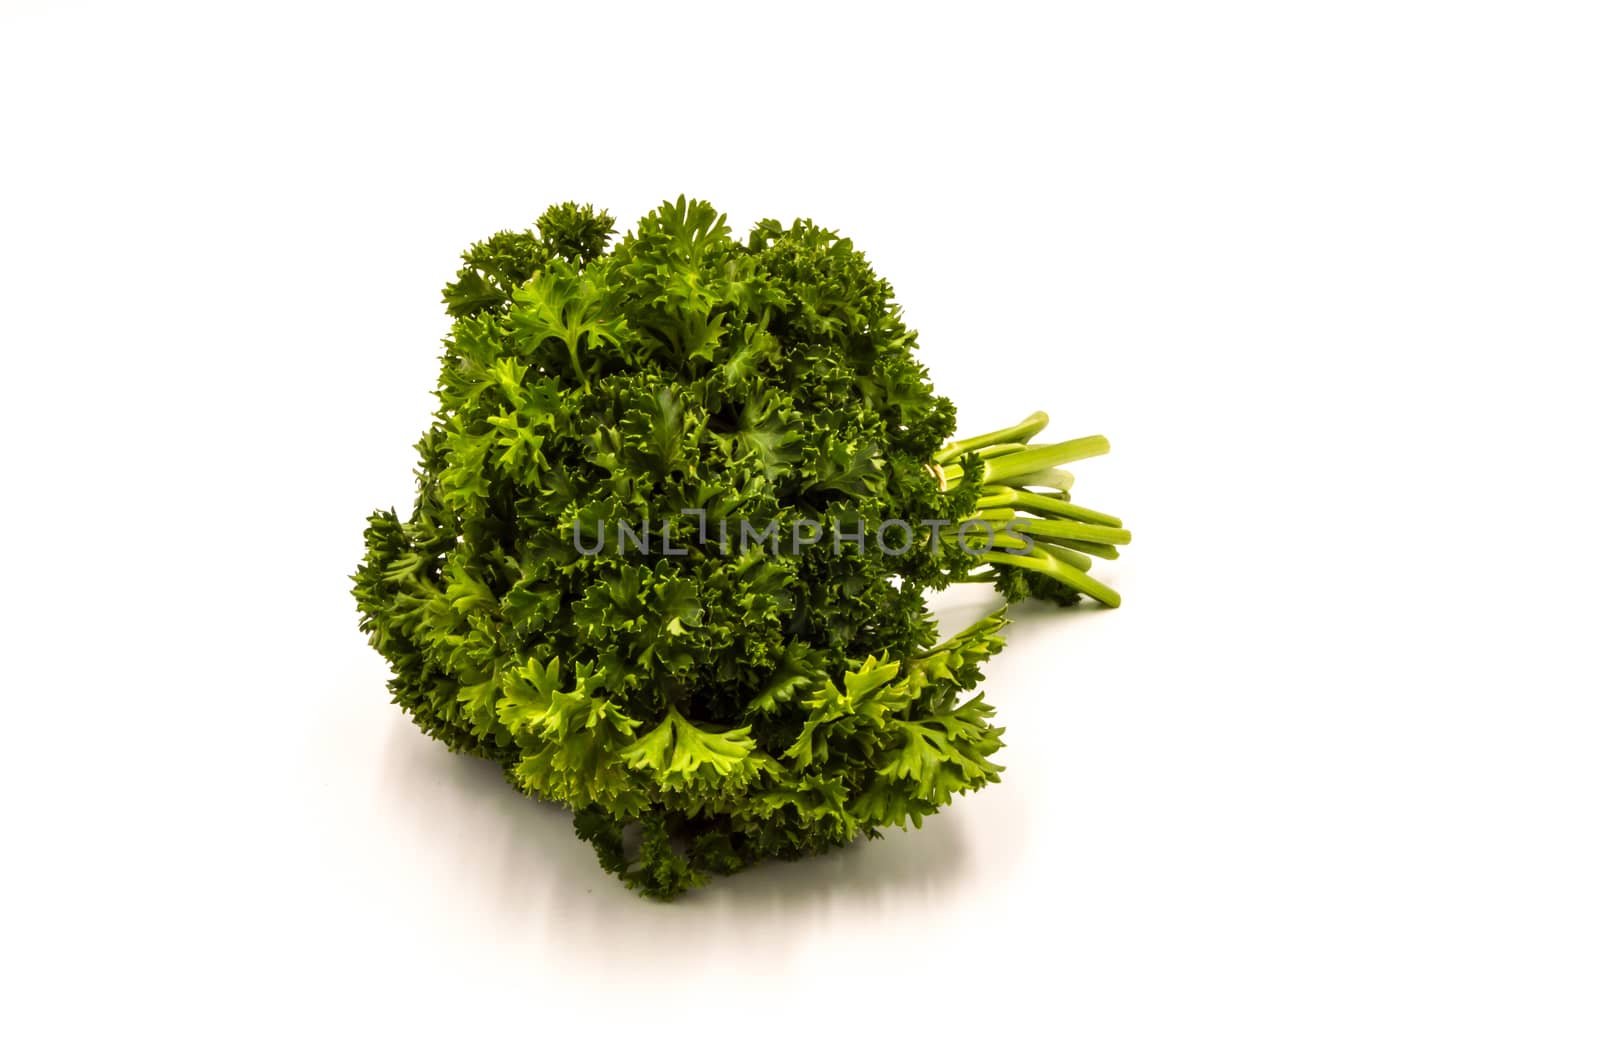 fresh bunch of parsley isolated on white